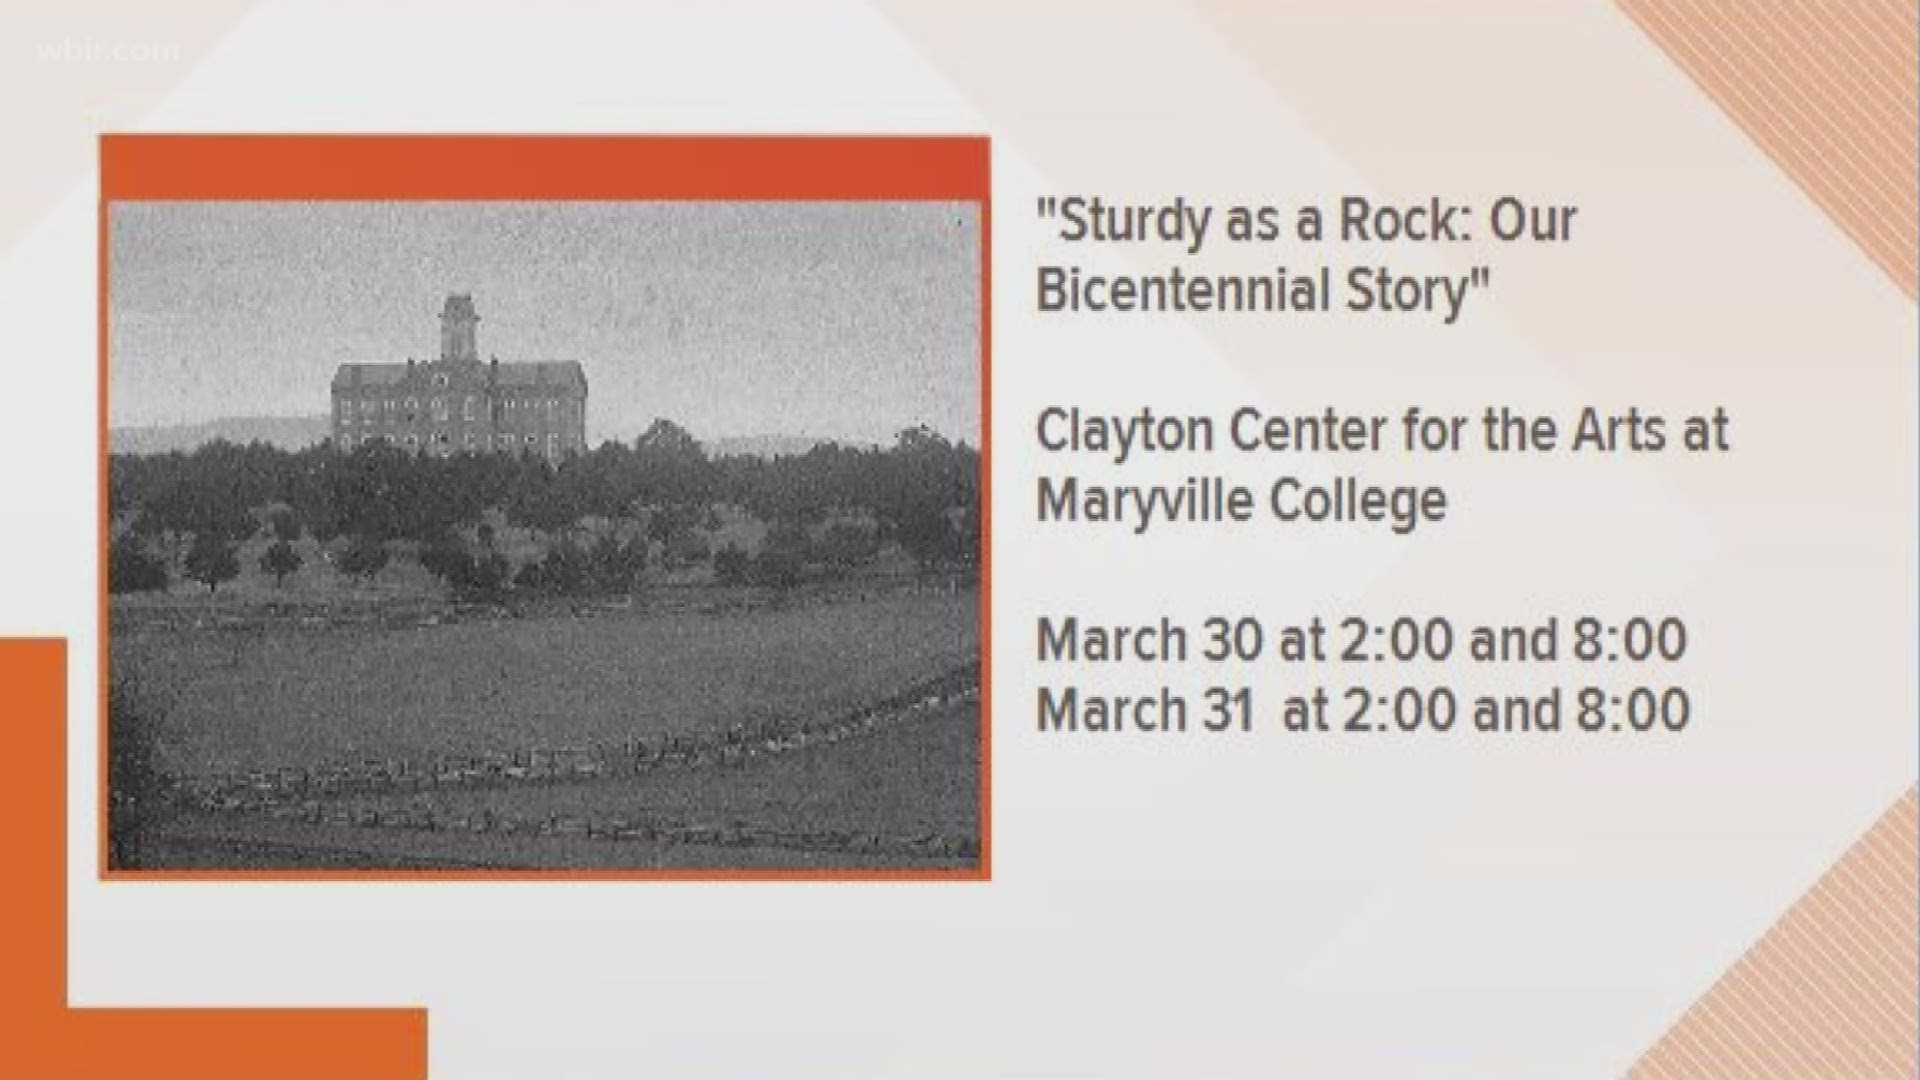 Original musical tells the story of the founding of Maryville College 200 years ago.